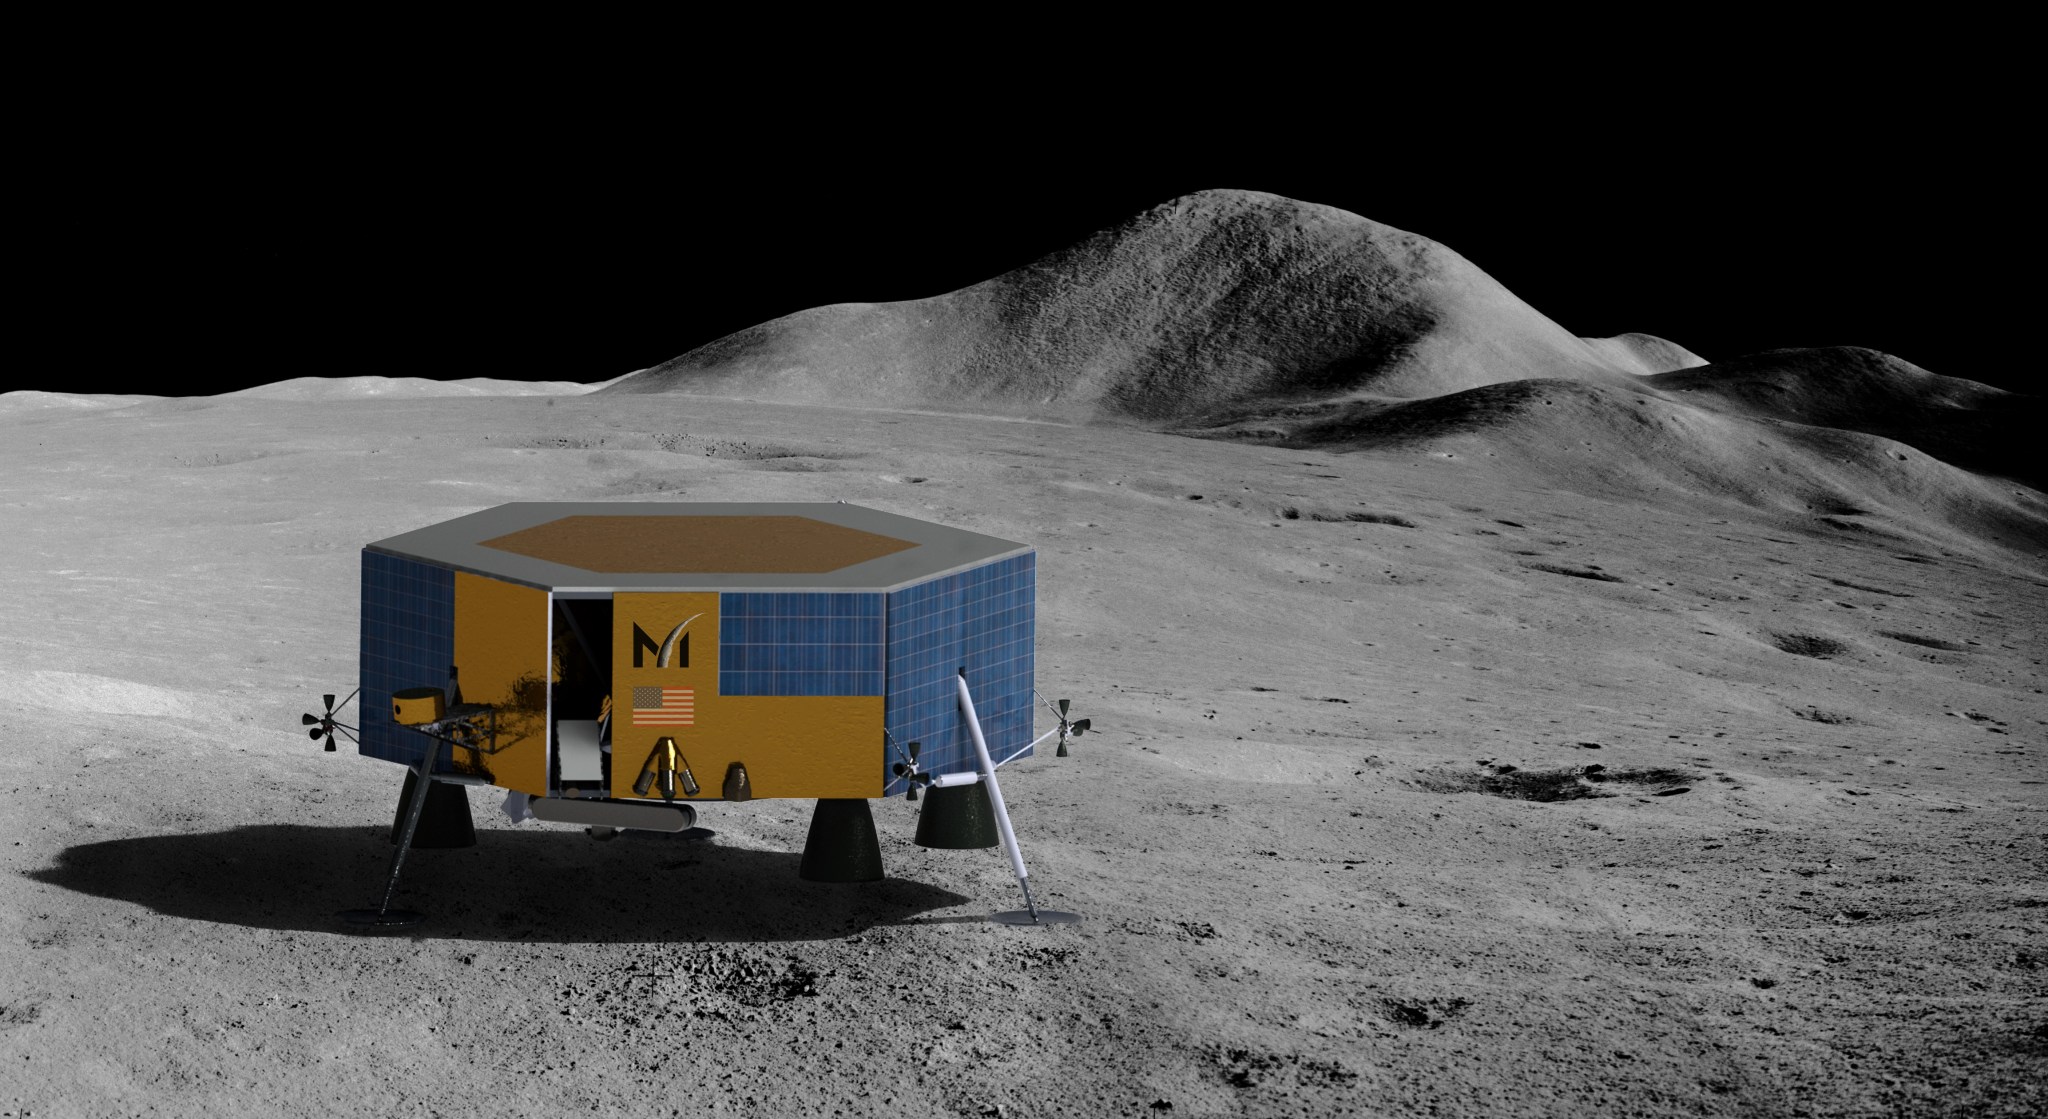 Masten’s XL-1 lunar lander will deliver science and technology payloads to the Moon’s South Pole in 2022.